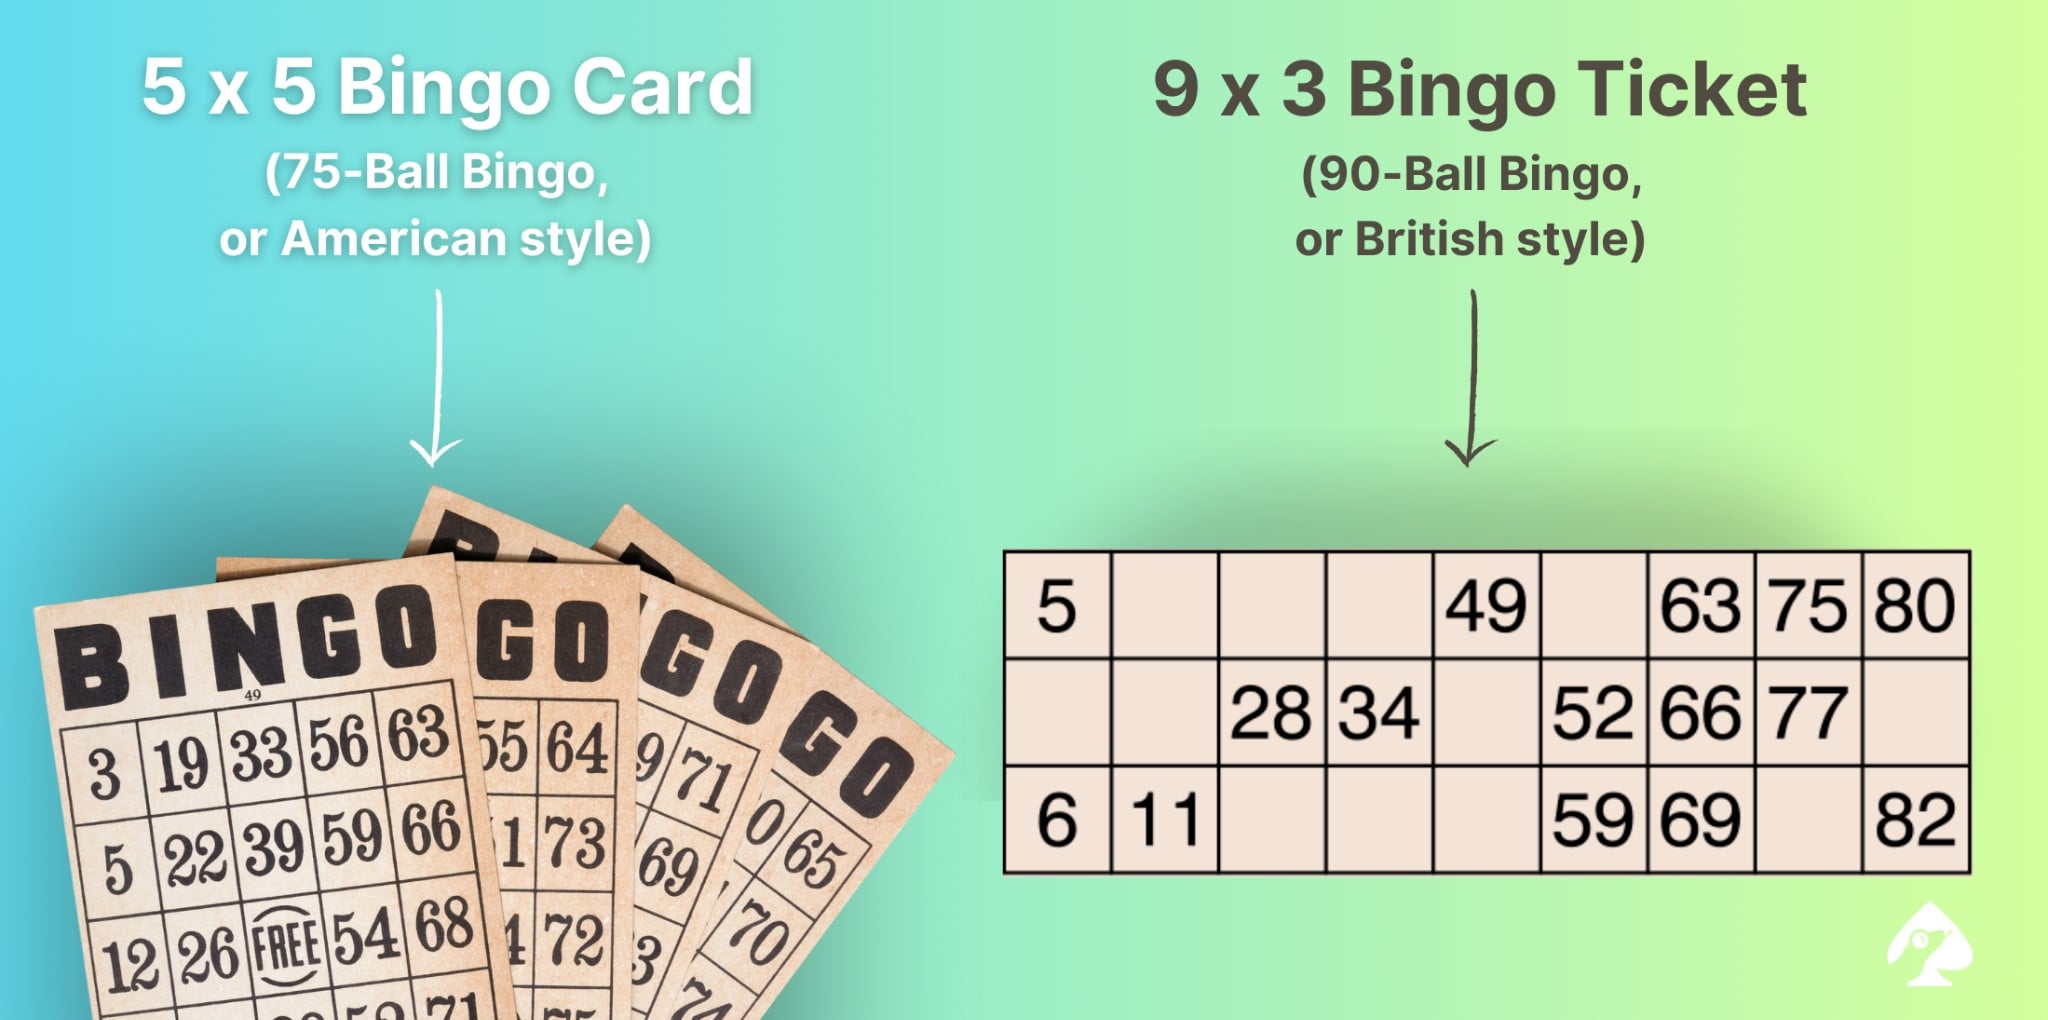 The two most common bingo card types